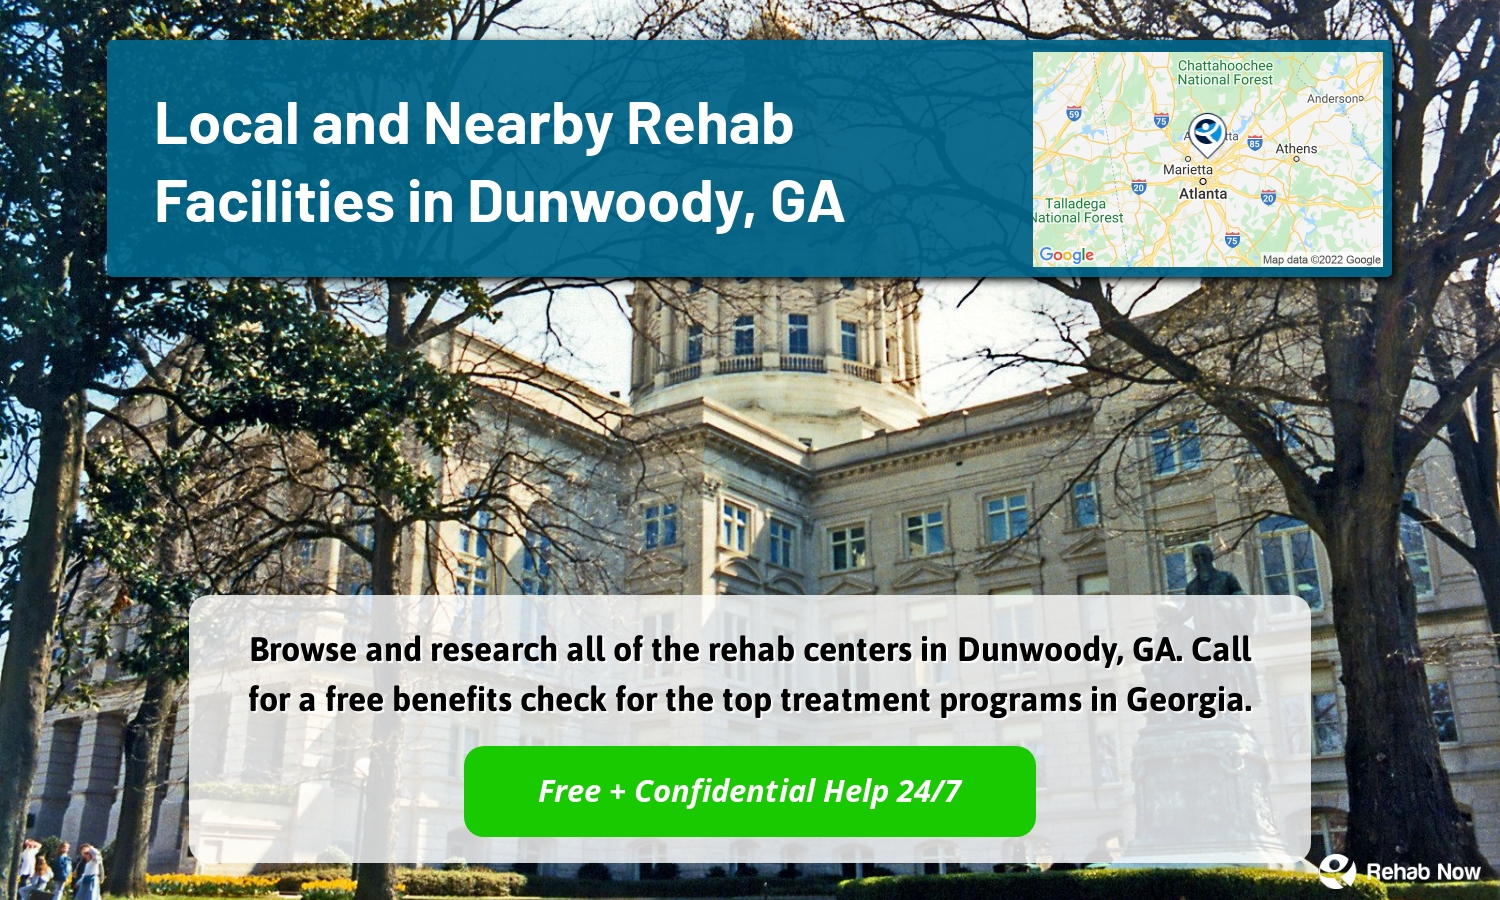 Browse and research all of the rehab centers in Dunwoody, GA. Call for a free benefits check for the top treatment programs in Georgia.